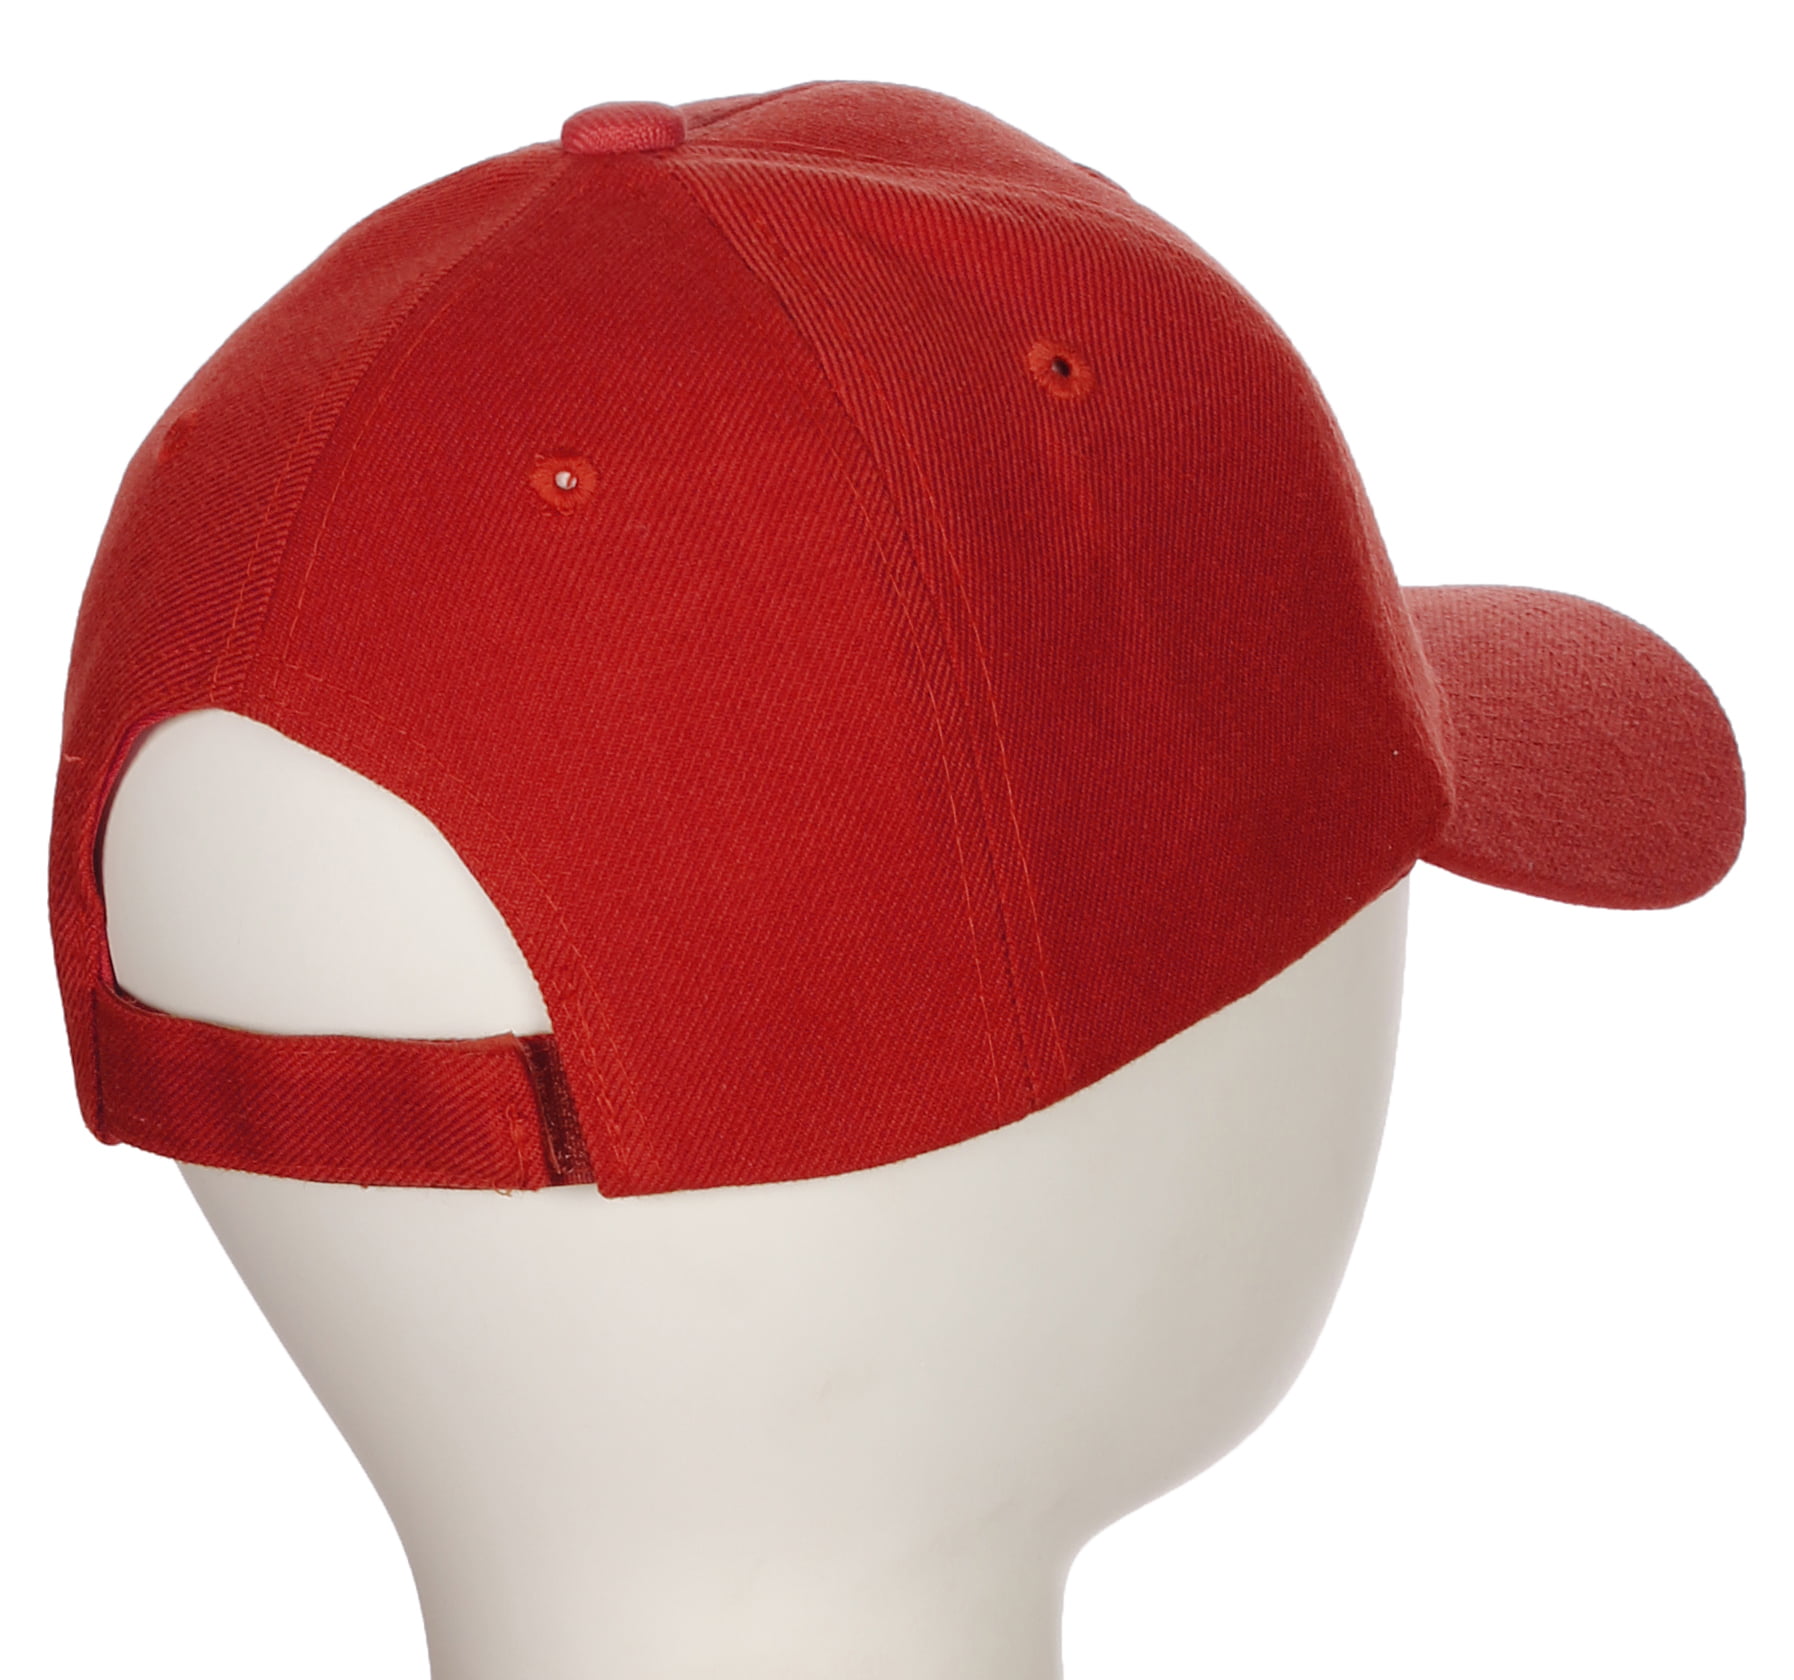 Classic 3D Raised Initial Letters Adjustable, Z Hat Hat Black Cap Red A Structured to Letter Baseball P White